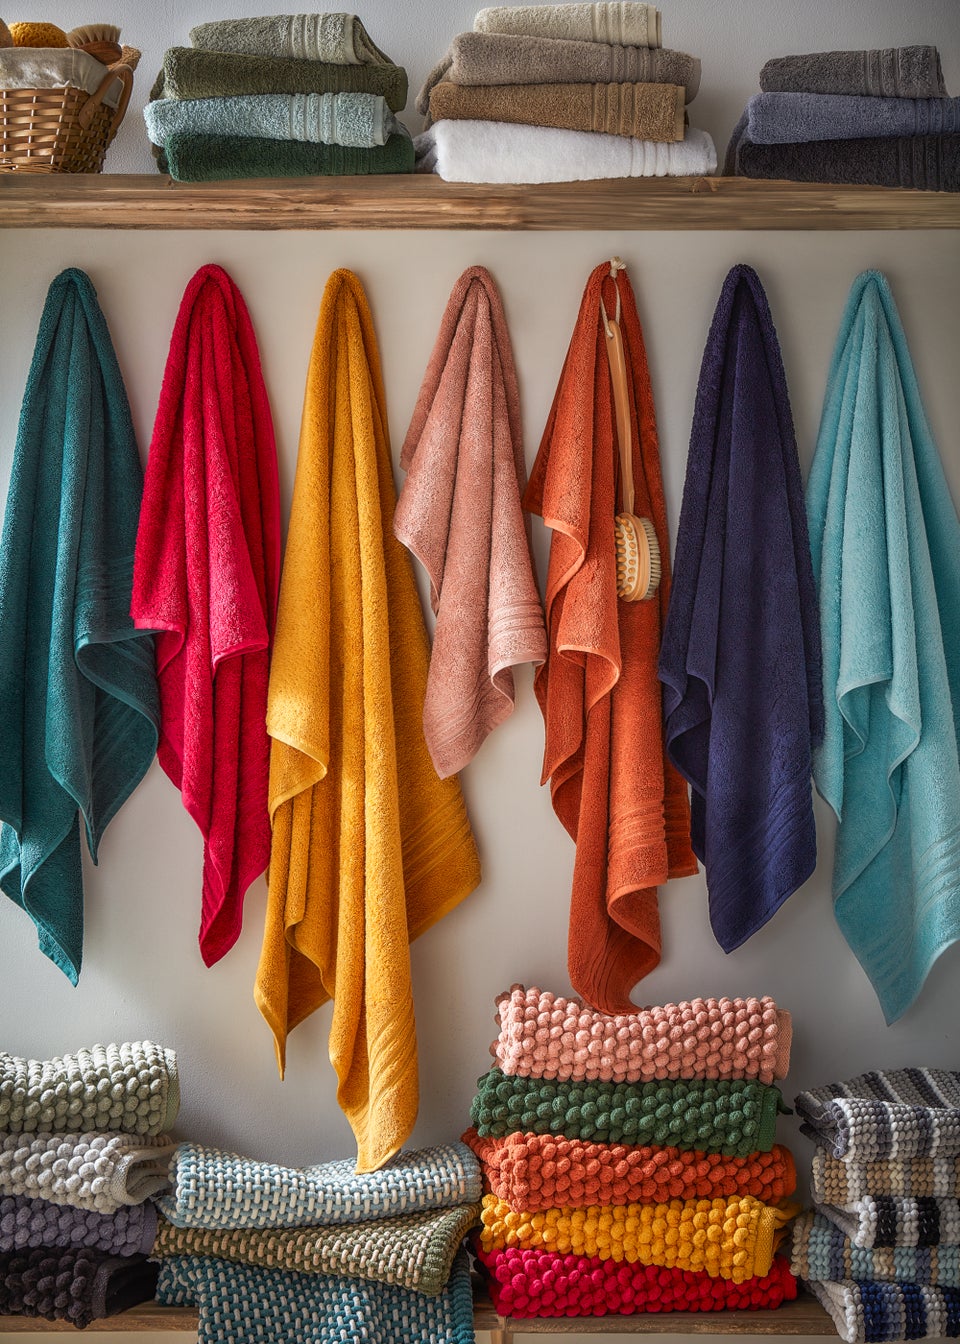 Teal 100% Egyptian Cotton Towels